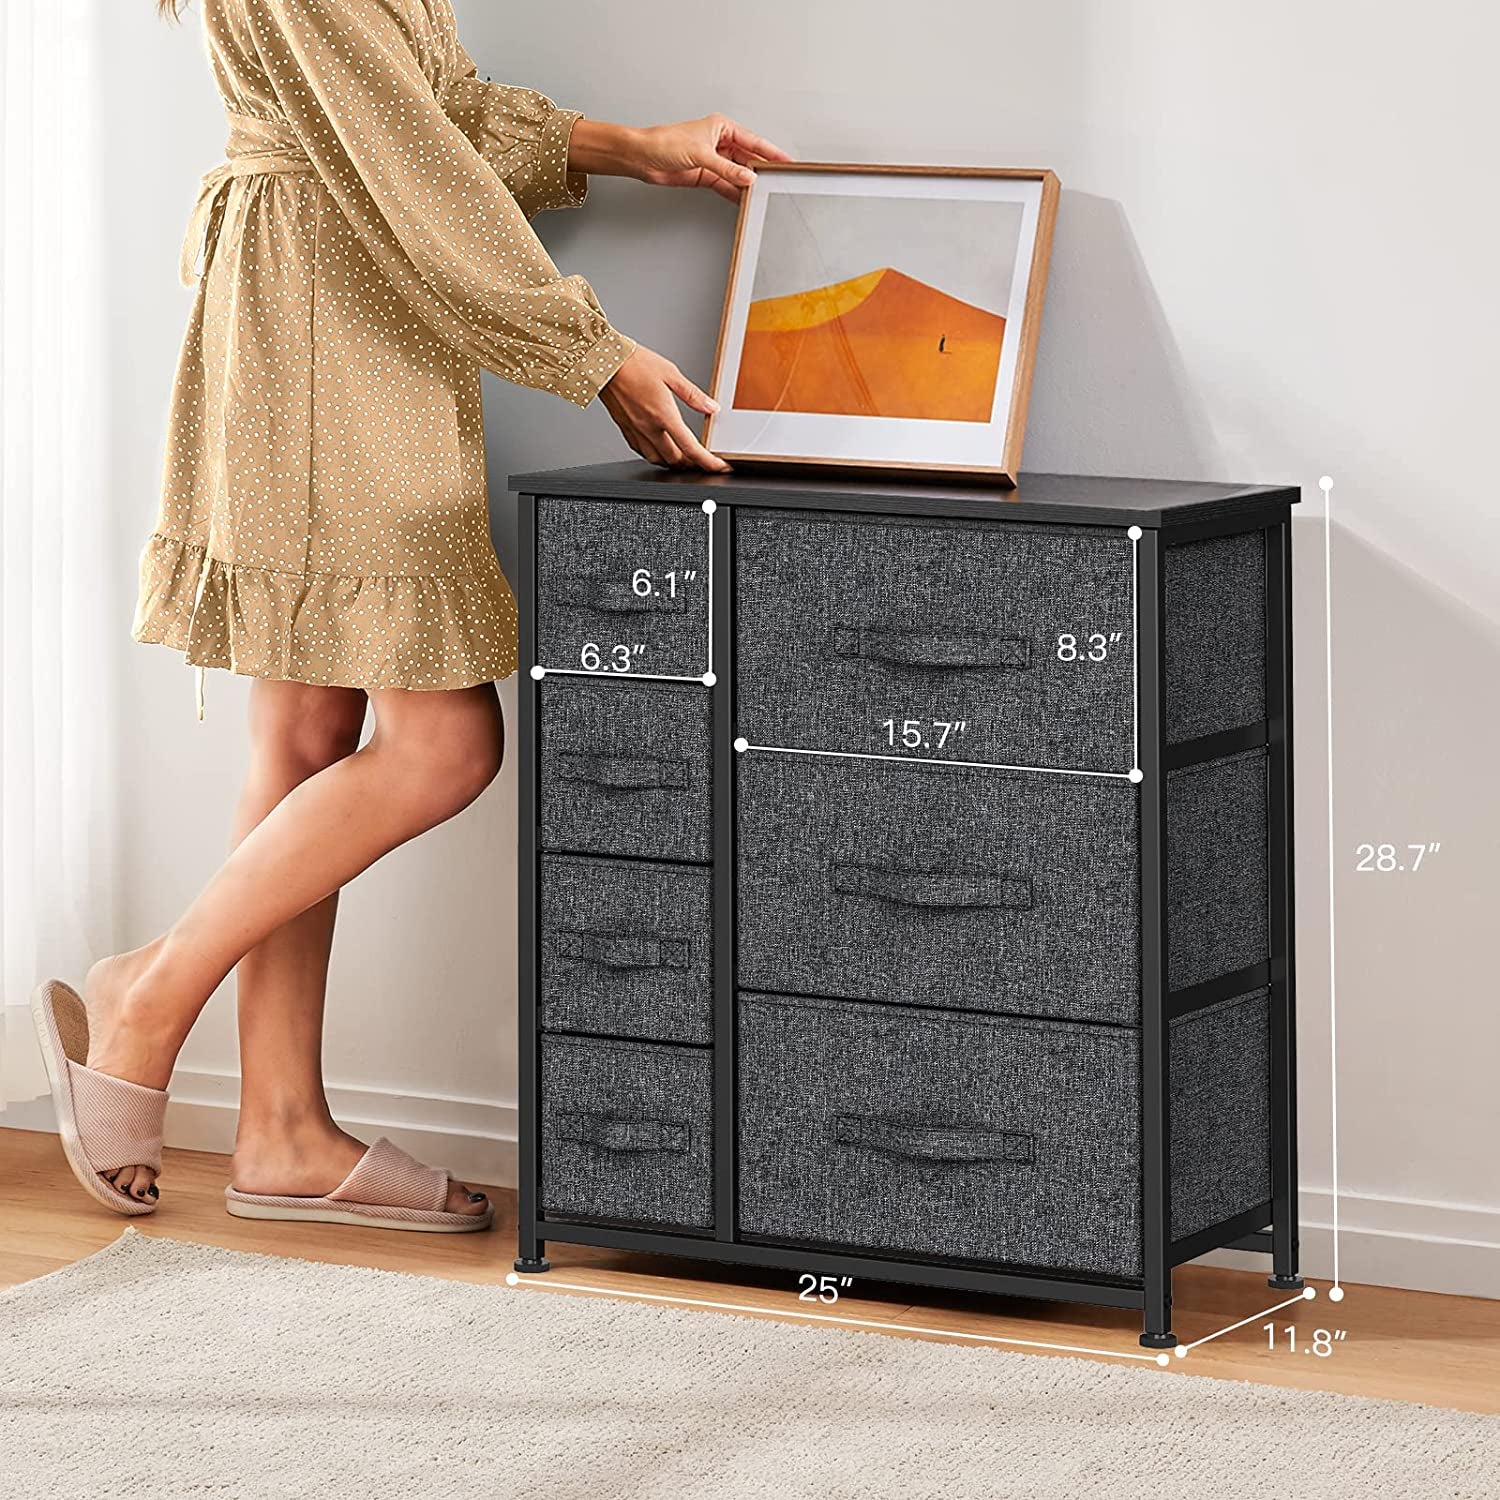 Chest of Drawers, Fabric Storage Drawers with Wood Top and Large Storage Space, Vertical Chest of 7 Drawers Easy to Install Room Organizer, Living Room, Nursery Room, Hallway, Black